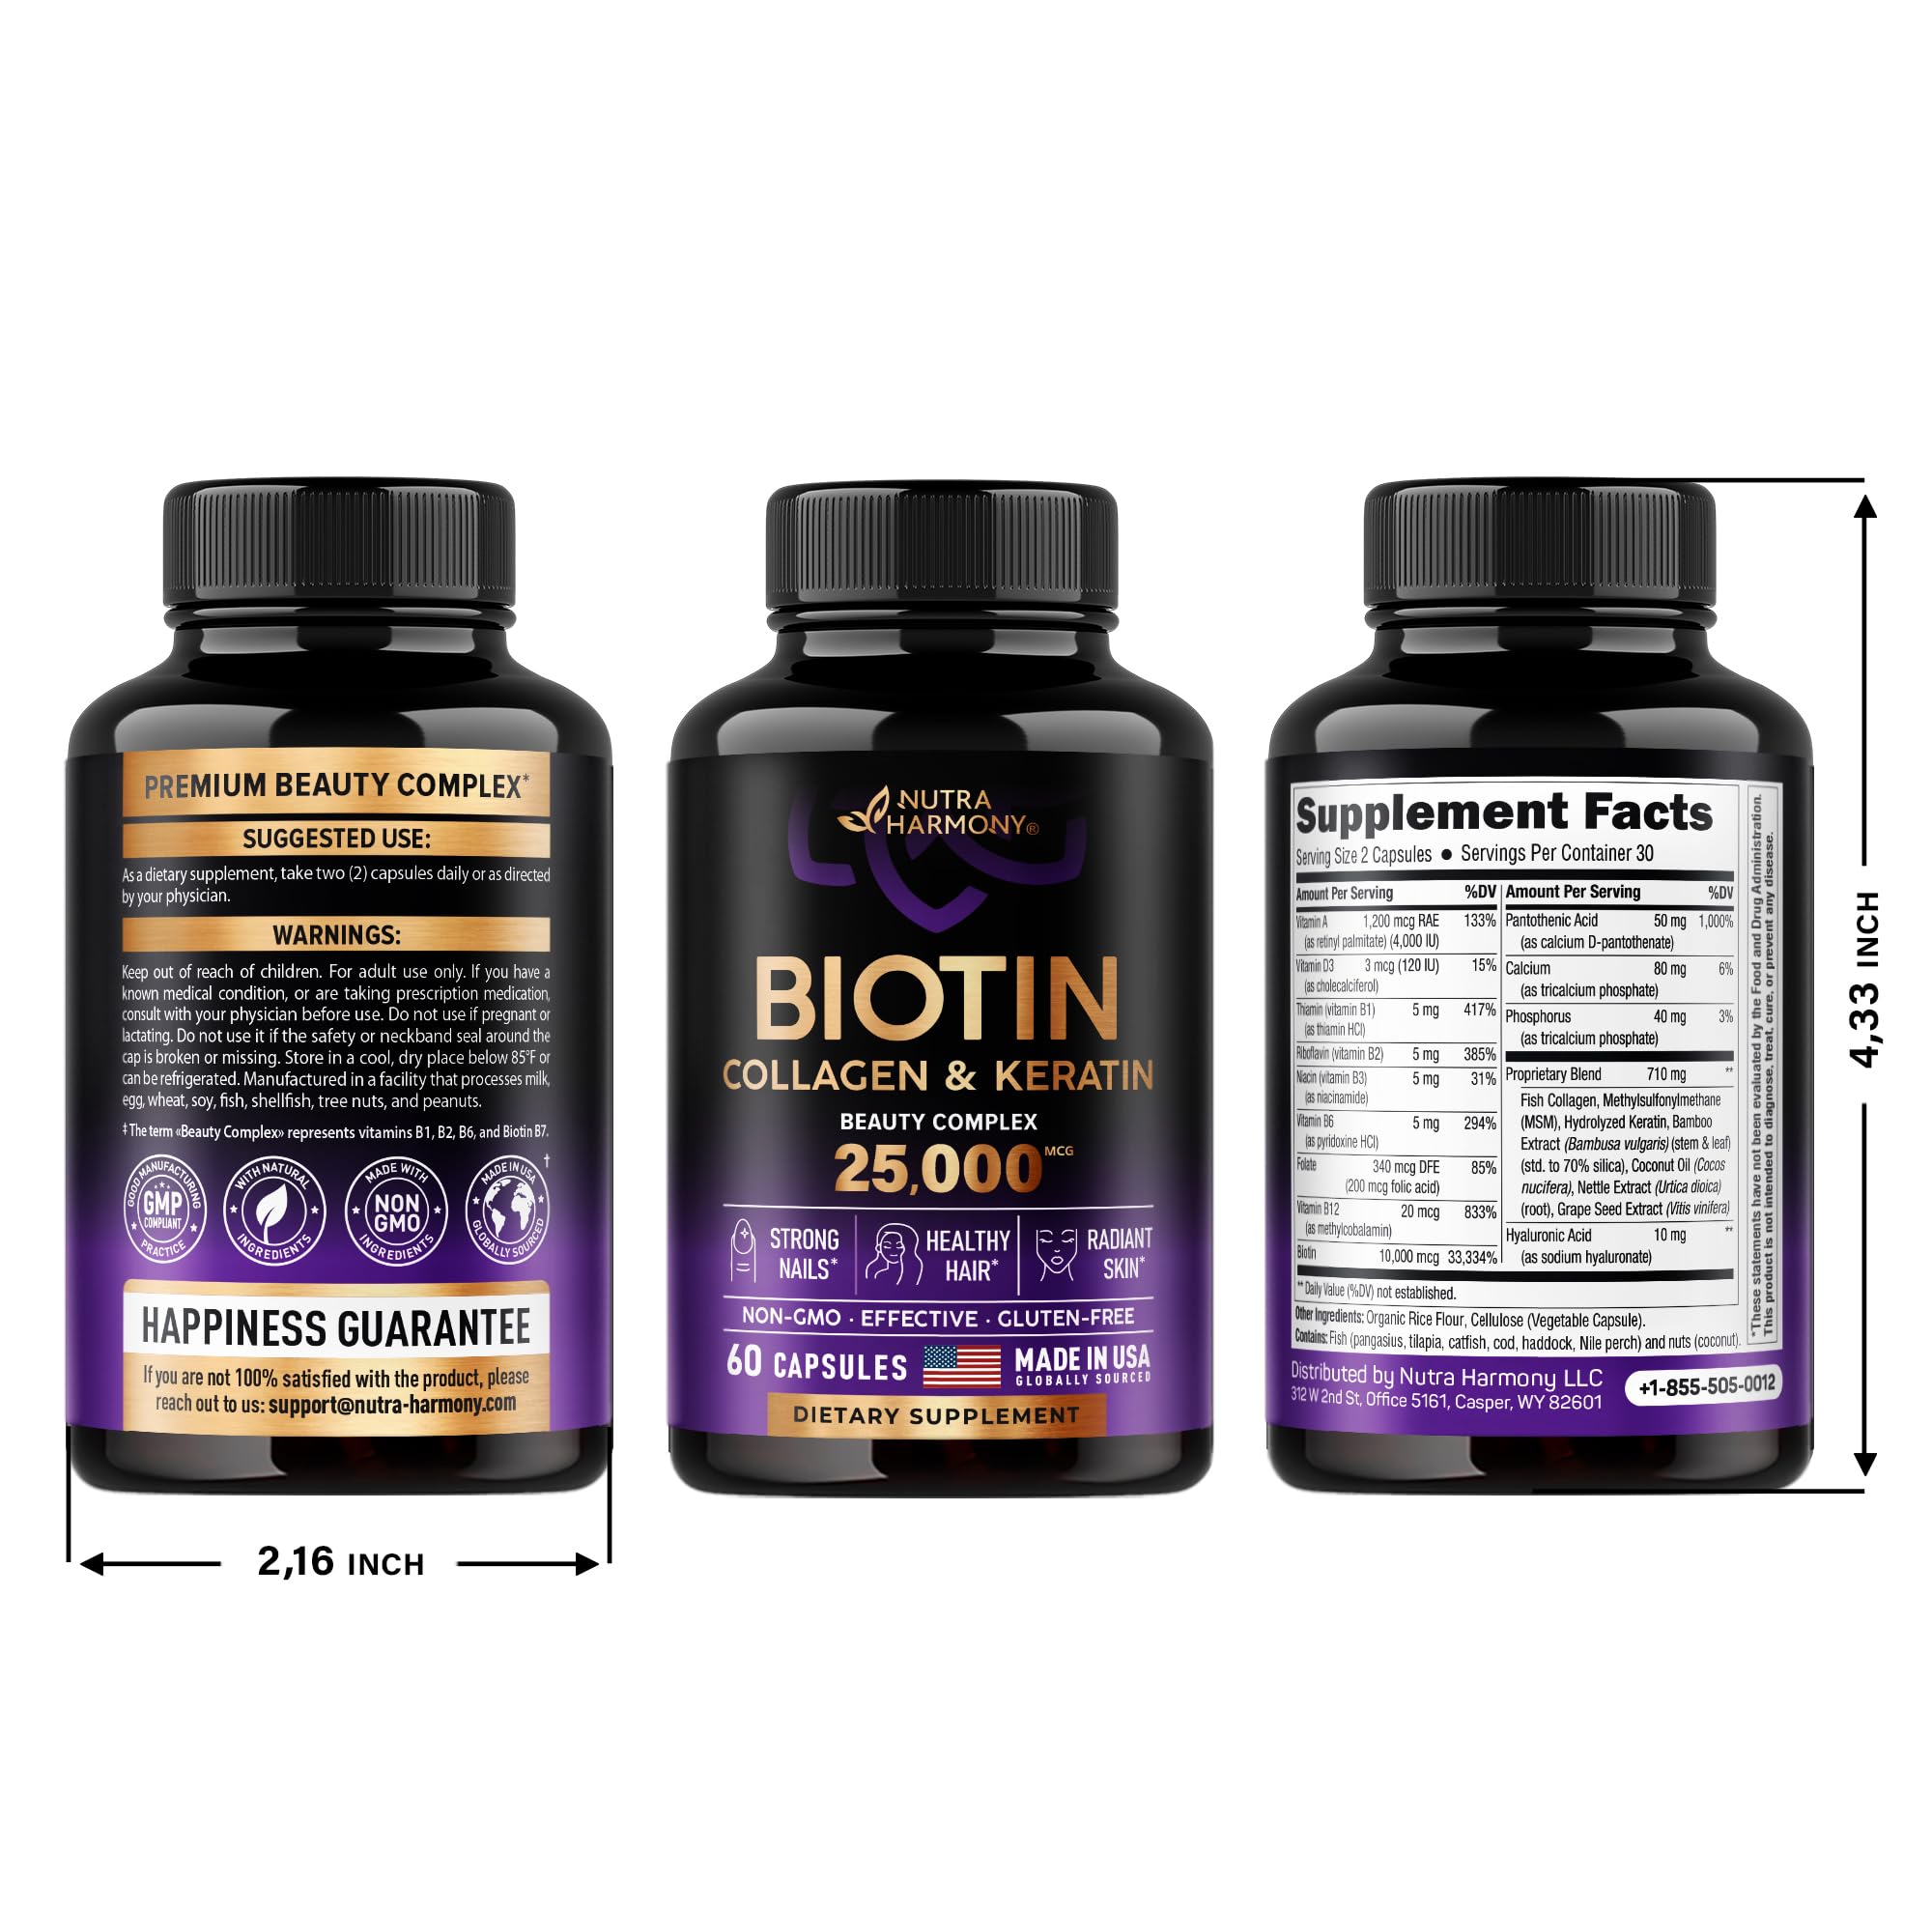 Biotin | Collagen | Keratin | Hyaluronic Acid - Hair Growth Support Supplement | Skin & Nails Beauty Complex 25000 mcg - B1 | B2 | B3 | B6 | B7 - Made in USA - For Women & Men | 60 Capsules